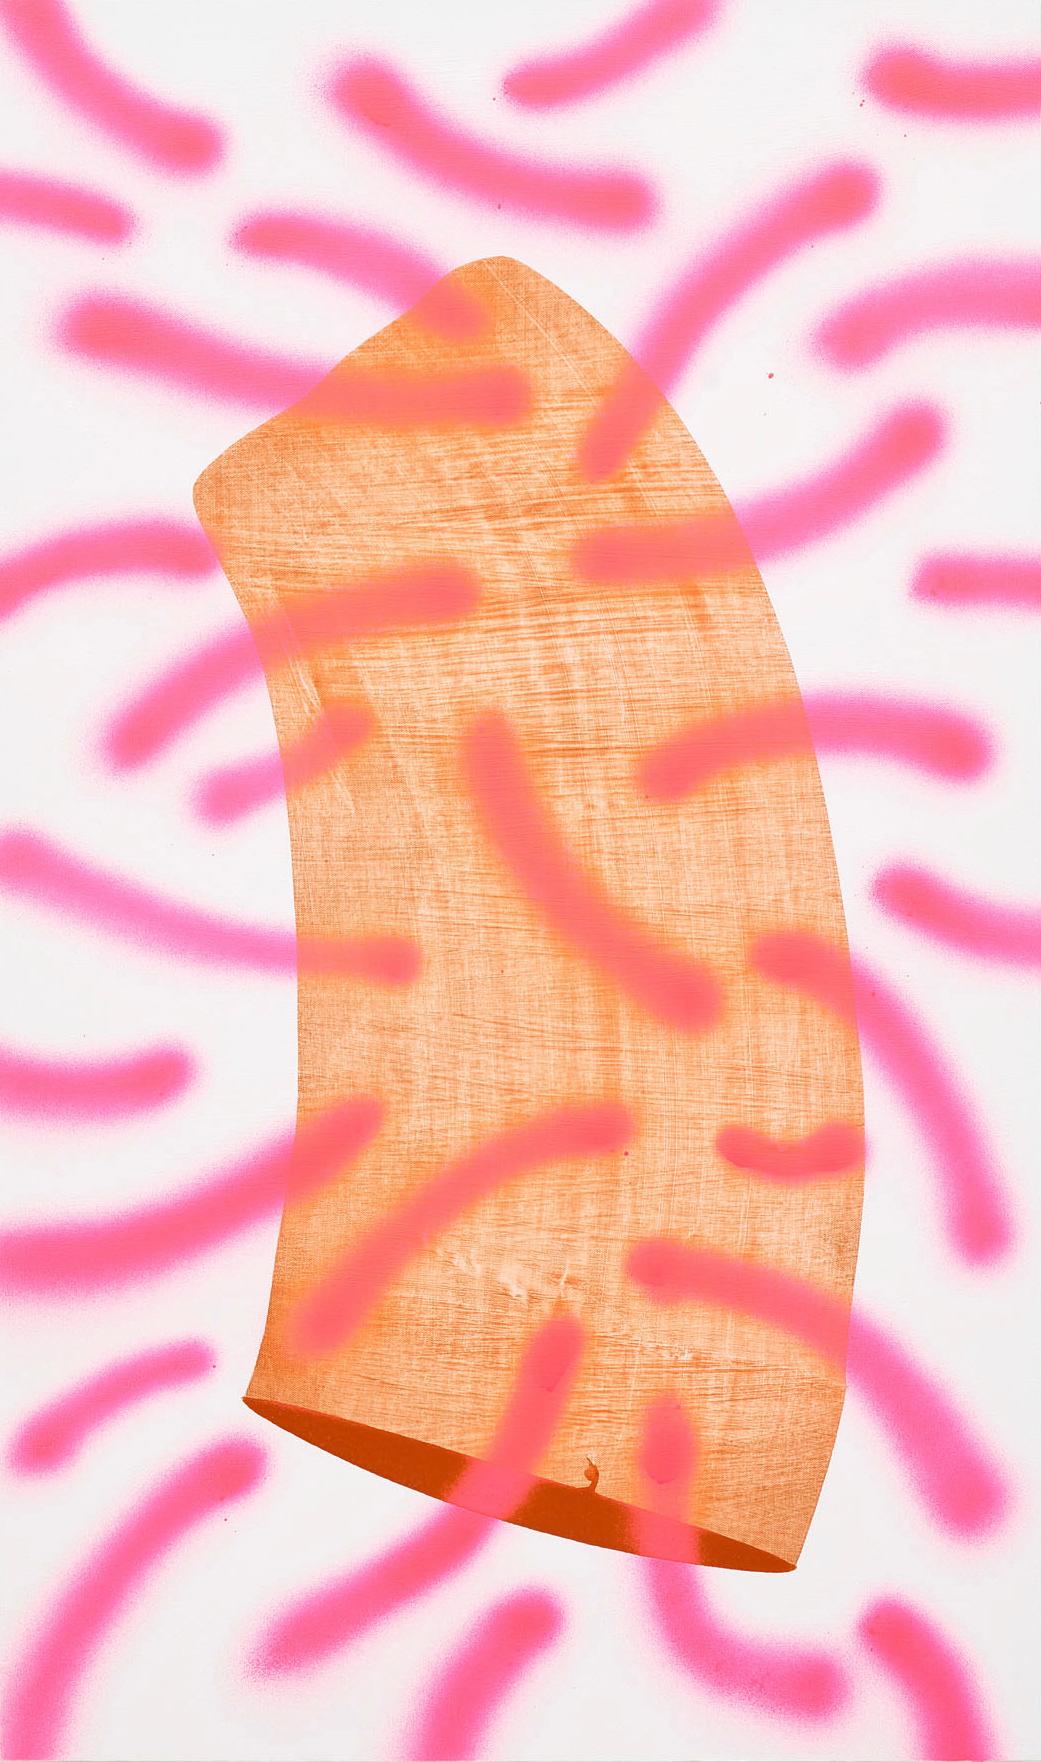 Mel Reese Abstract Painting - "Sexual Pleasure", contemporary hot pink & orange abstract acrylic & spray paint